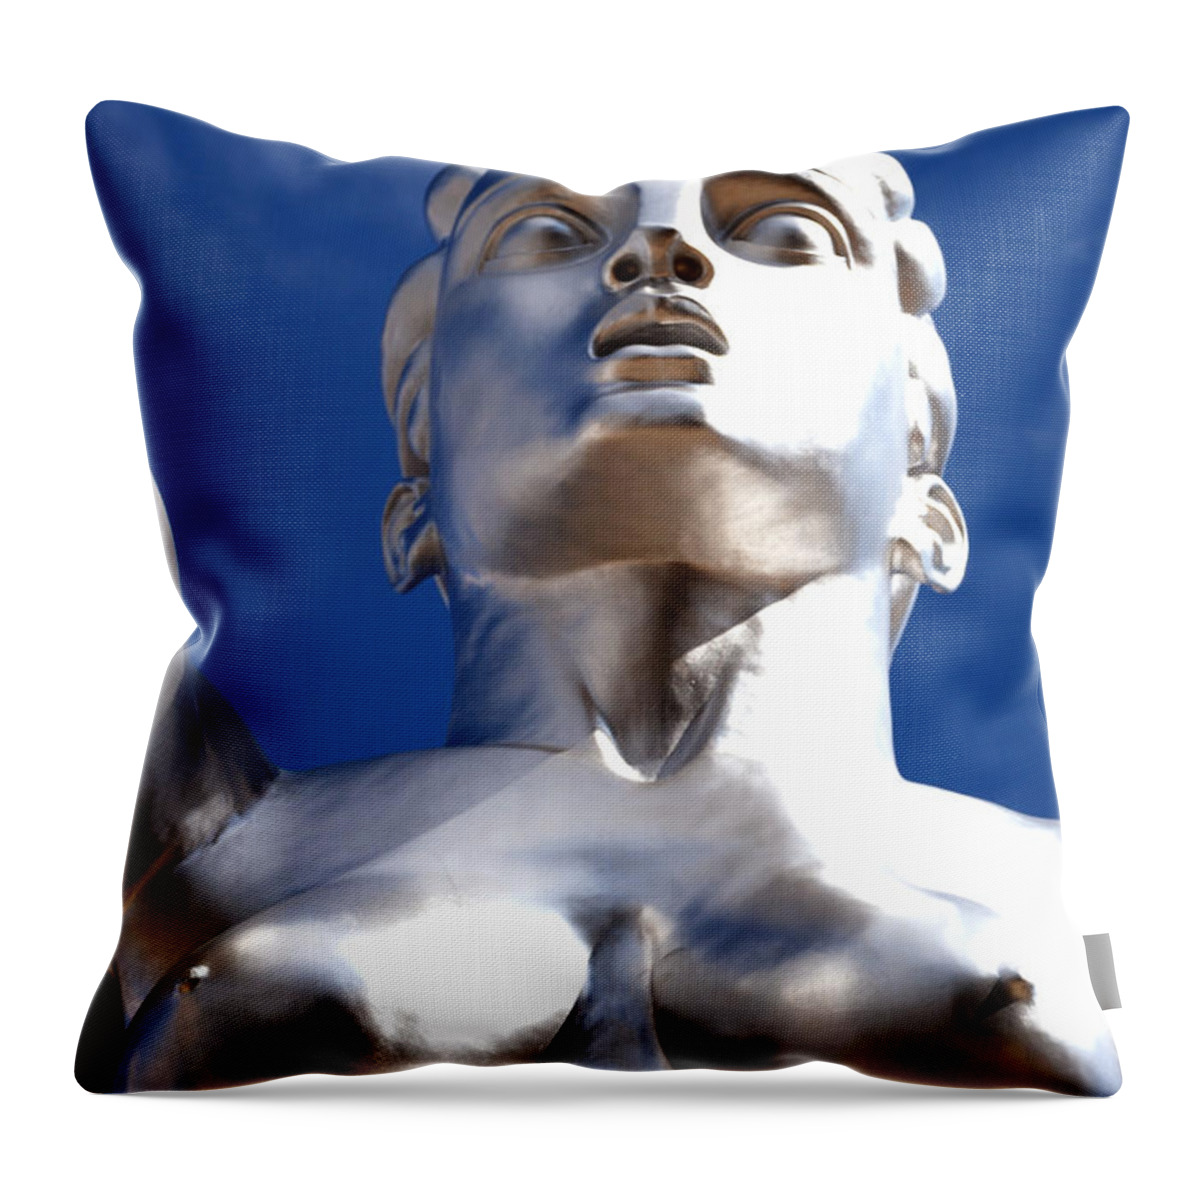 Bust Throw Pillow featuring the photograph Contralto 14 by Norma Brock